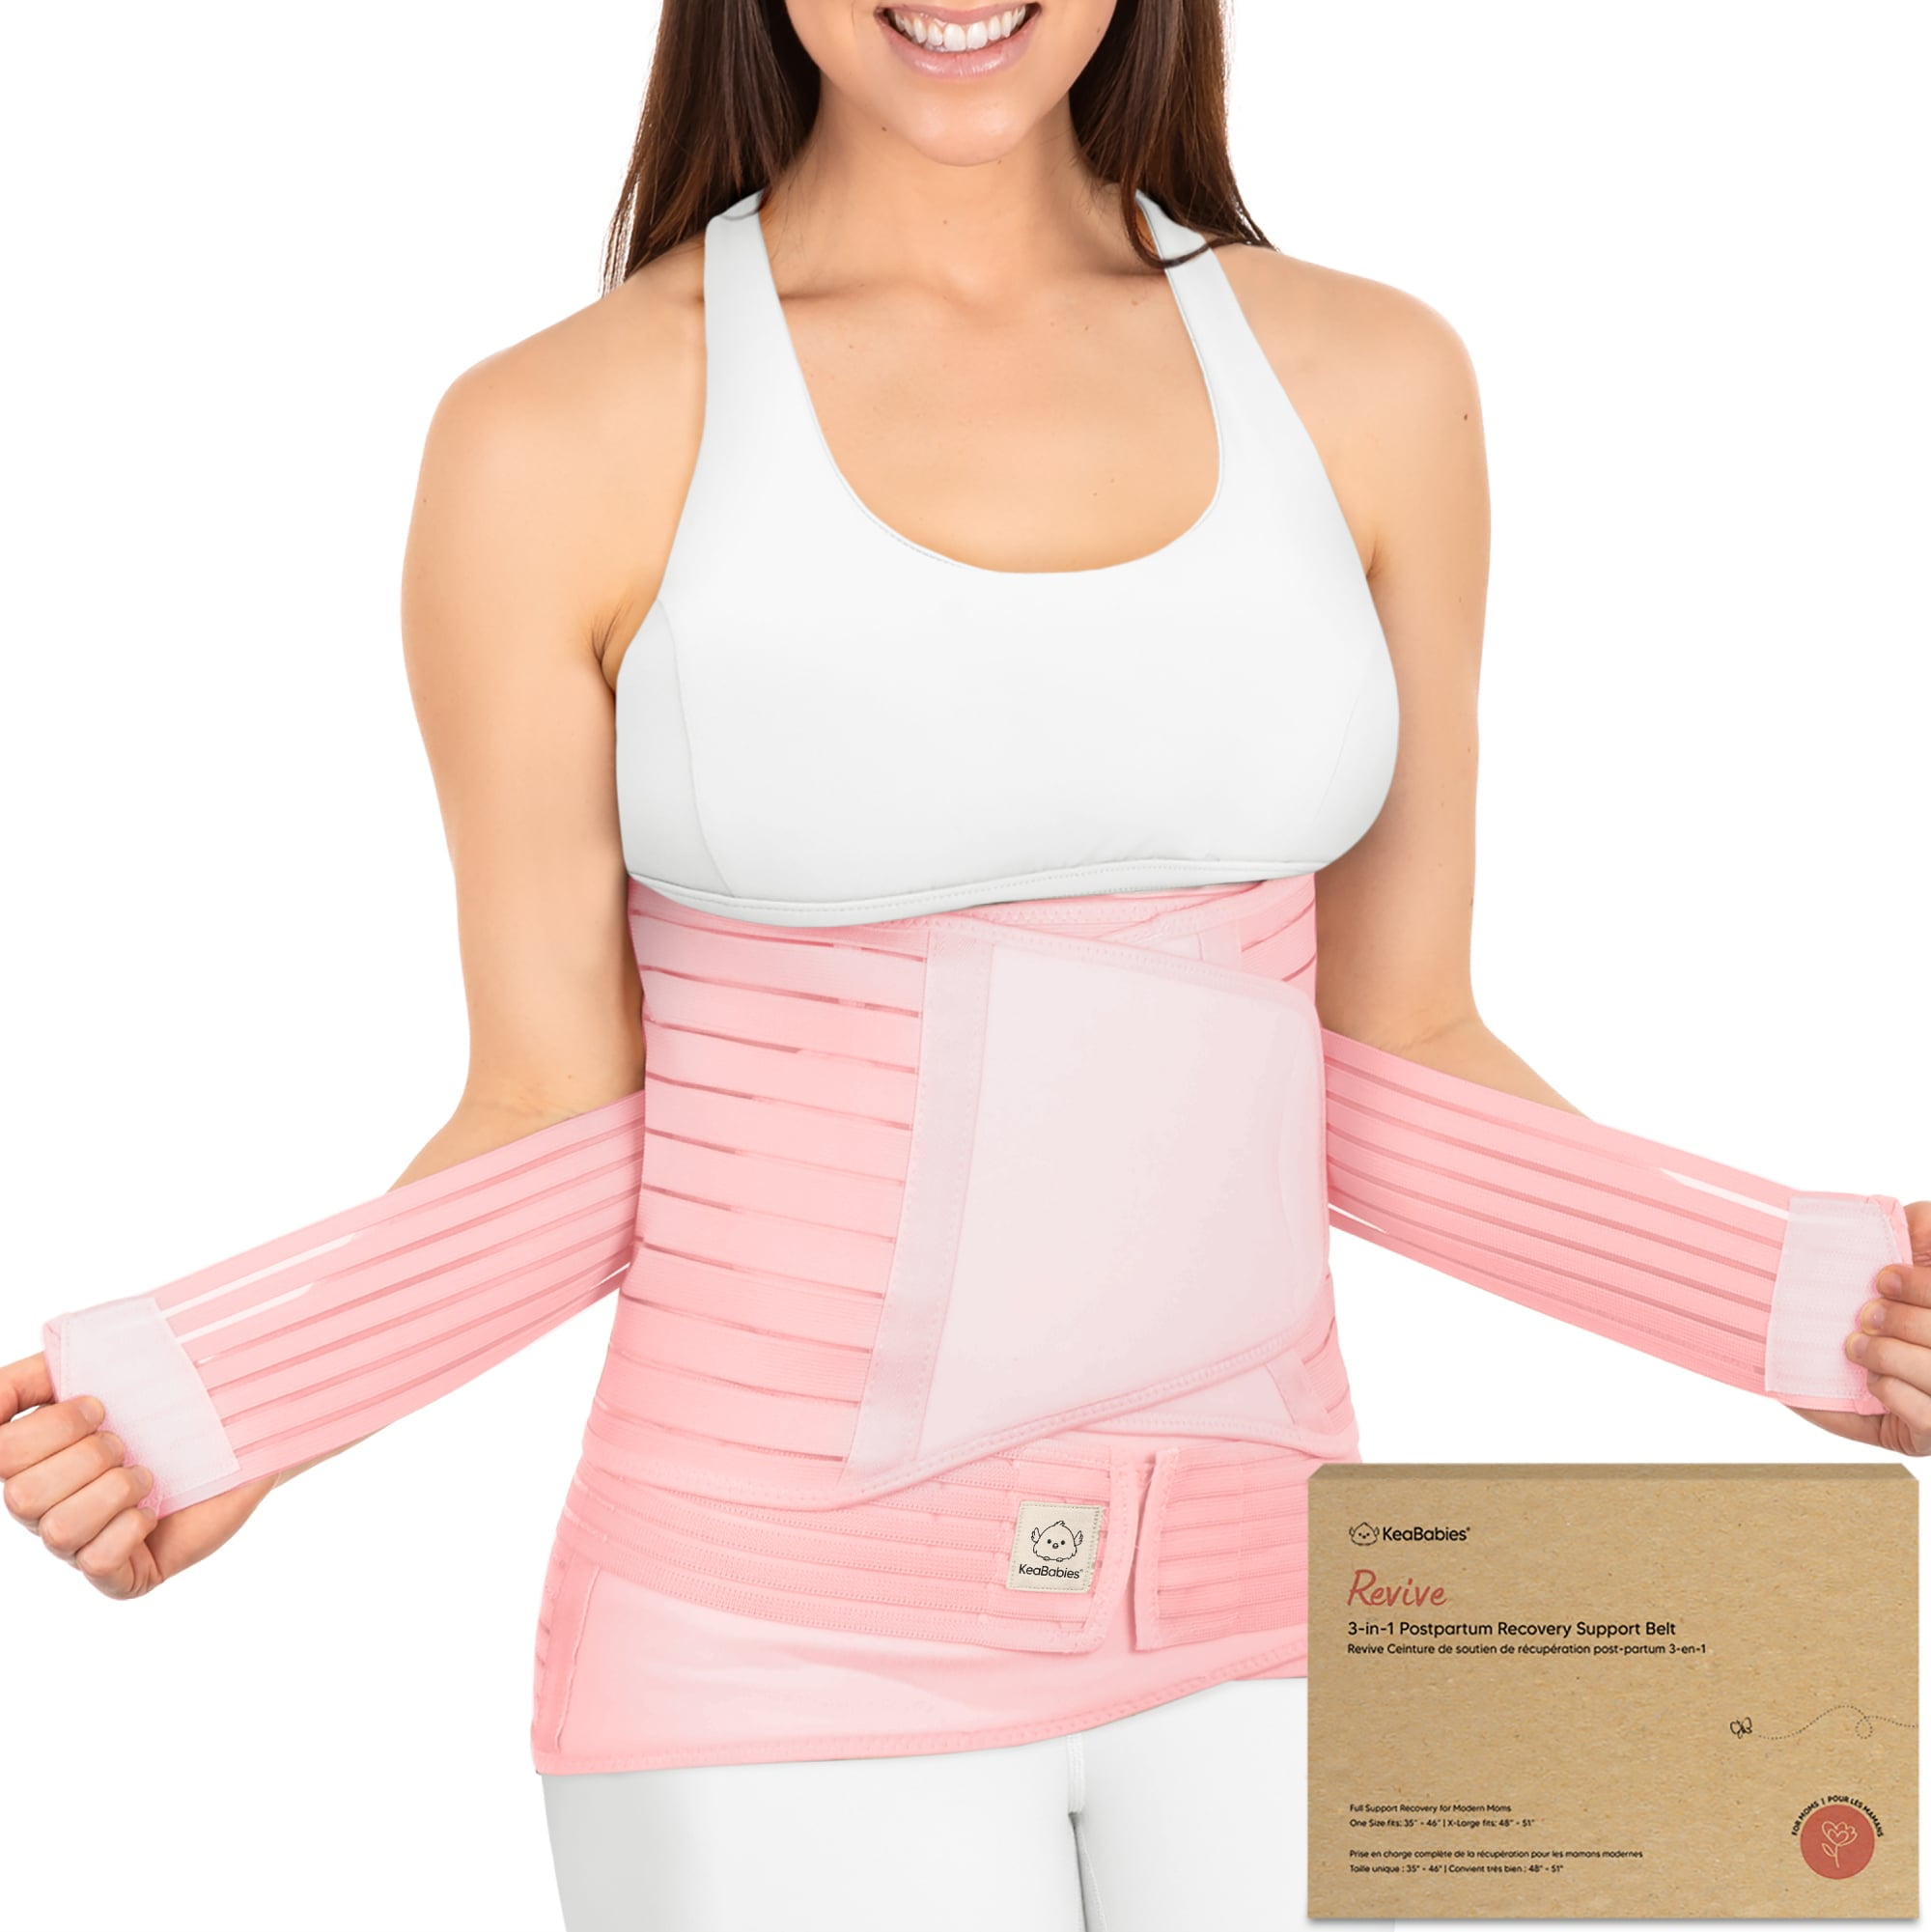 Best Maternity Shapewear For Support During Pregnancy » Mudpie Lullaby